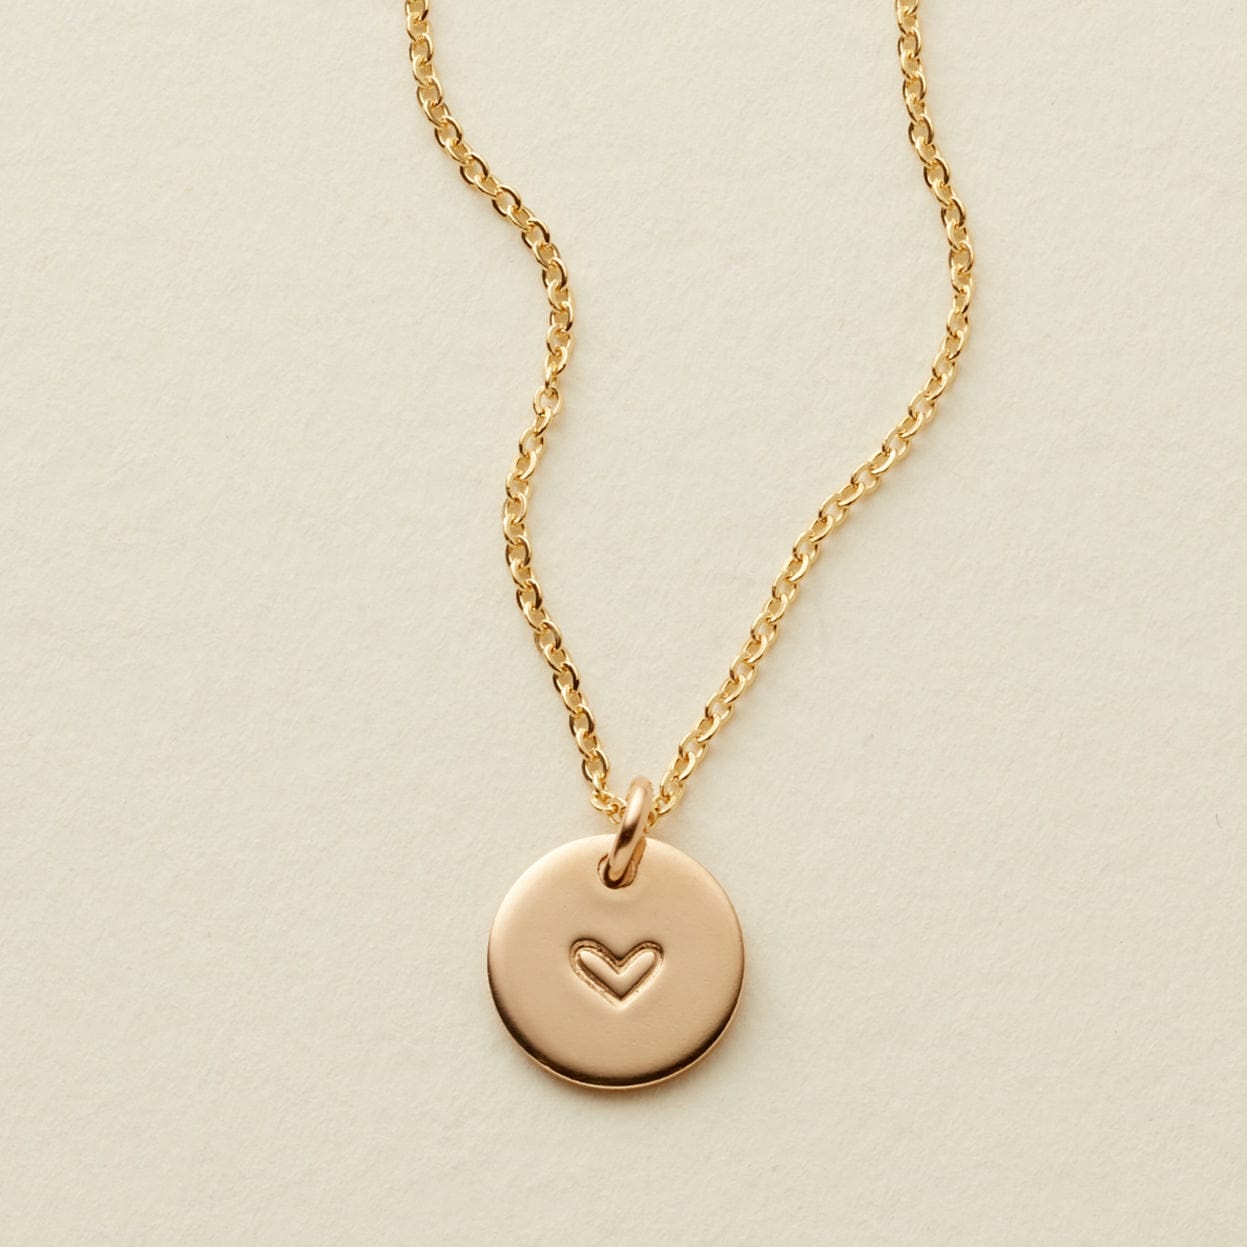 Heart Disc Necklace - 3/8" Necklace